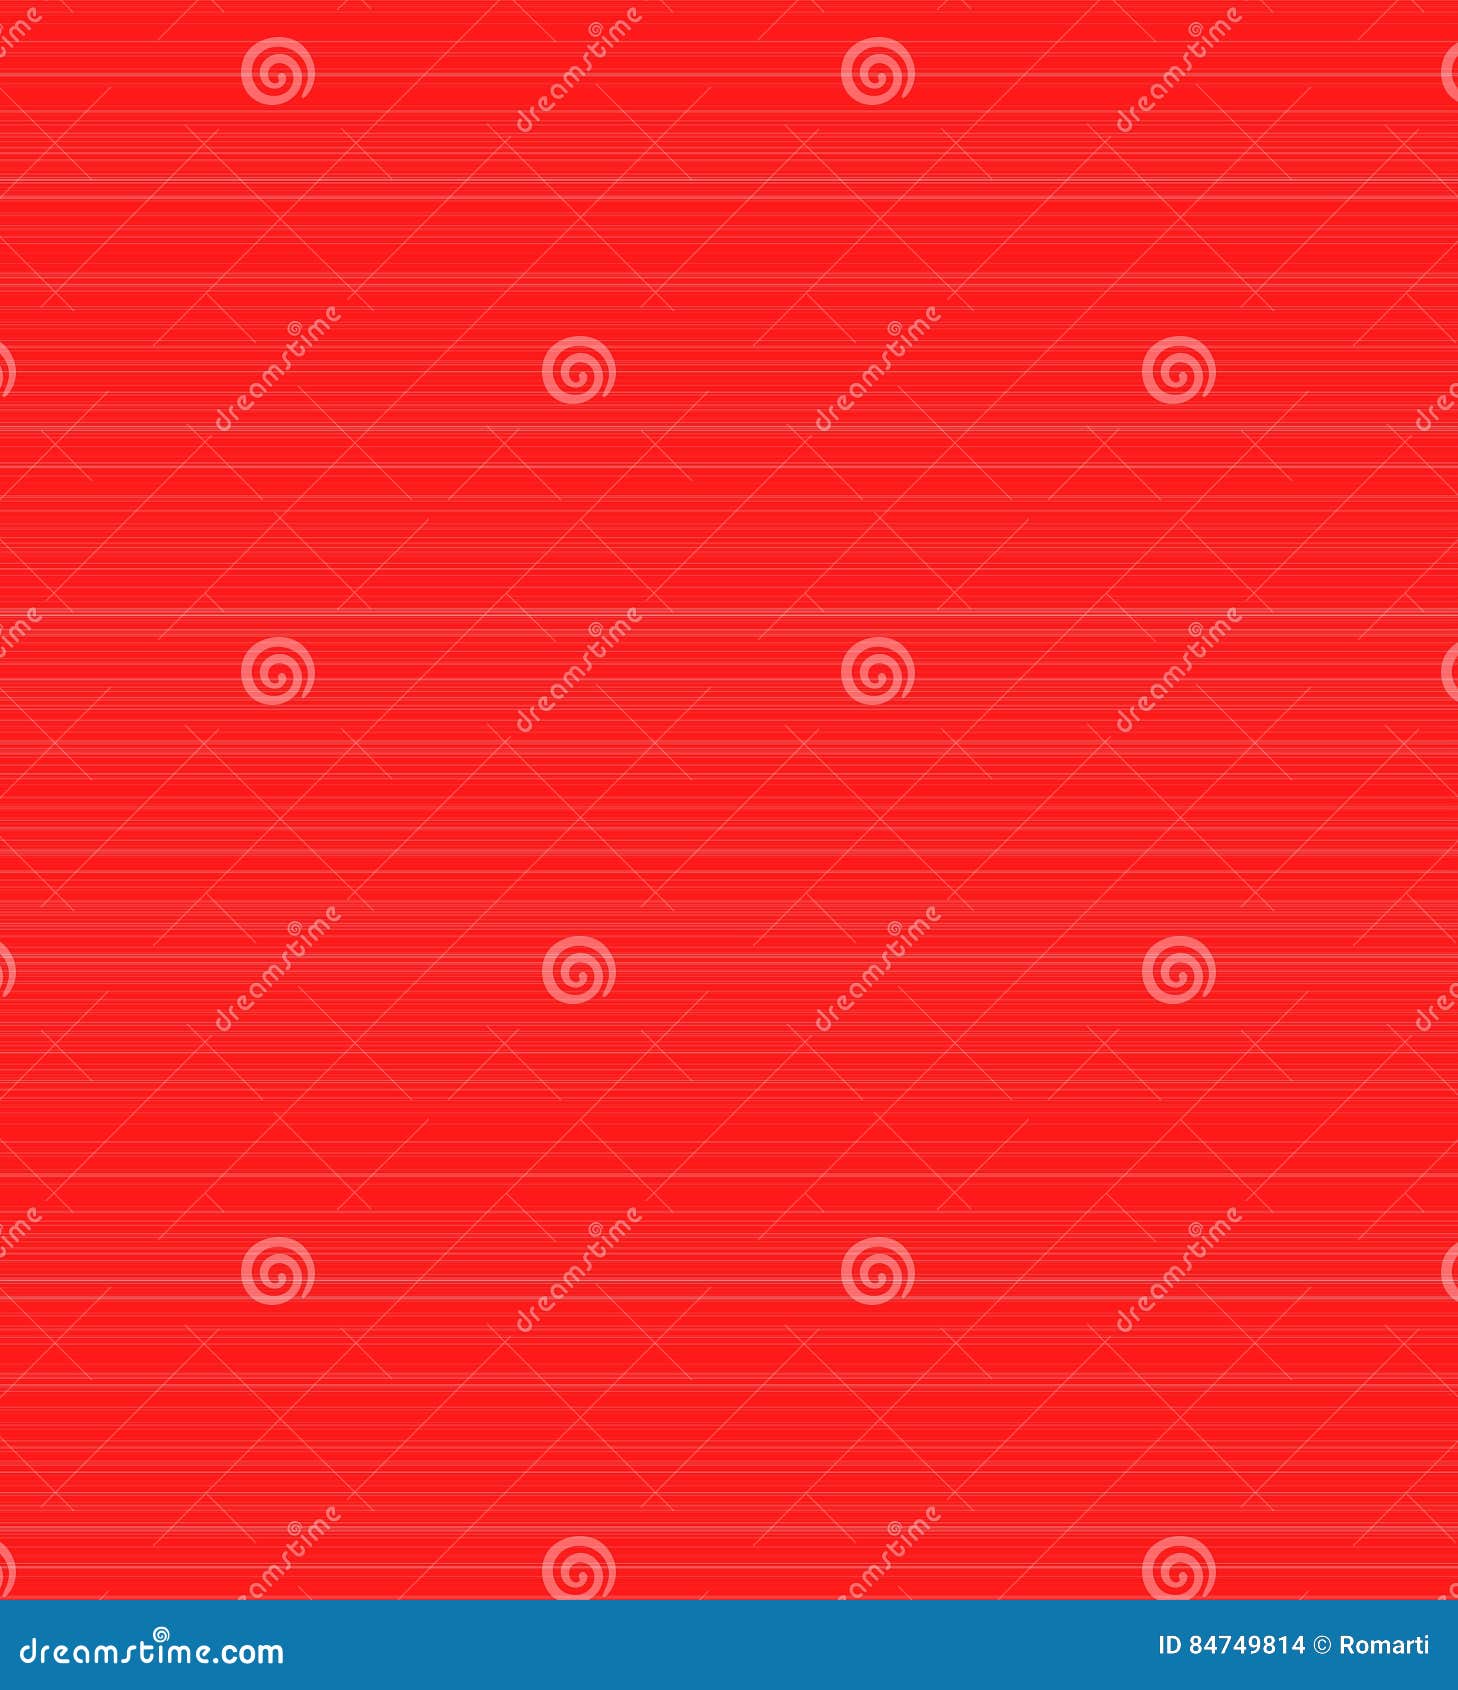 Red And White Striped Background Stock Illustration - Illustration of